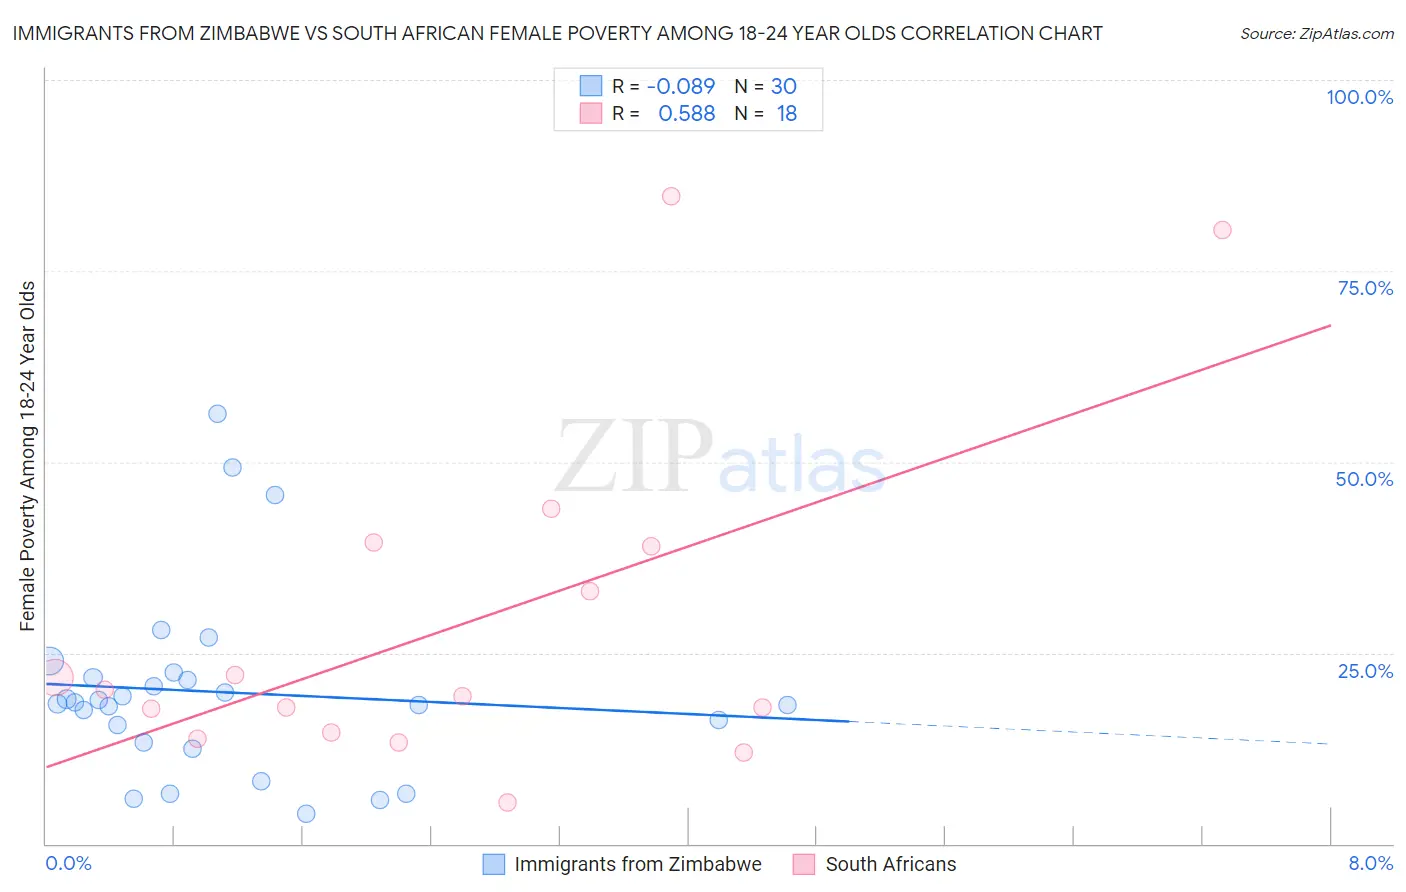 Immigrants from Zimbabwe vs South African Female Poverty Among 18-24 Year Olds